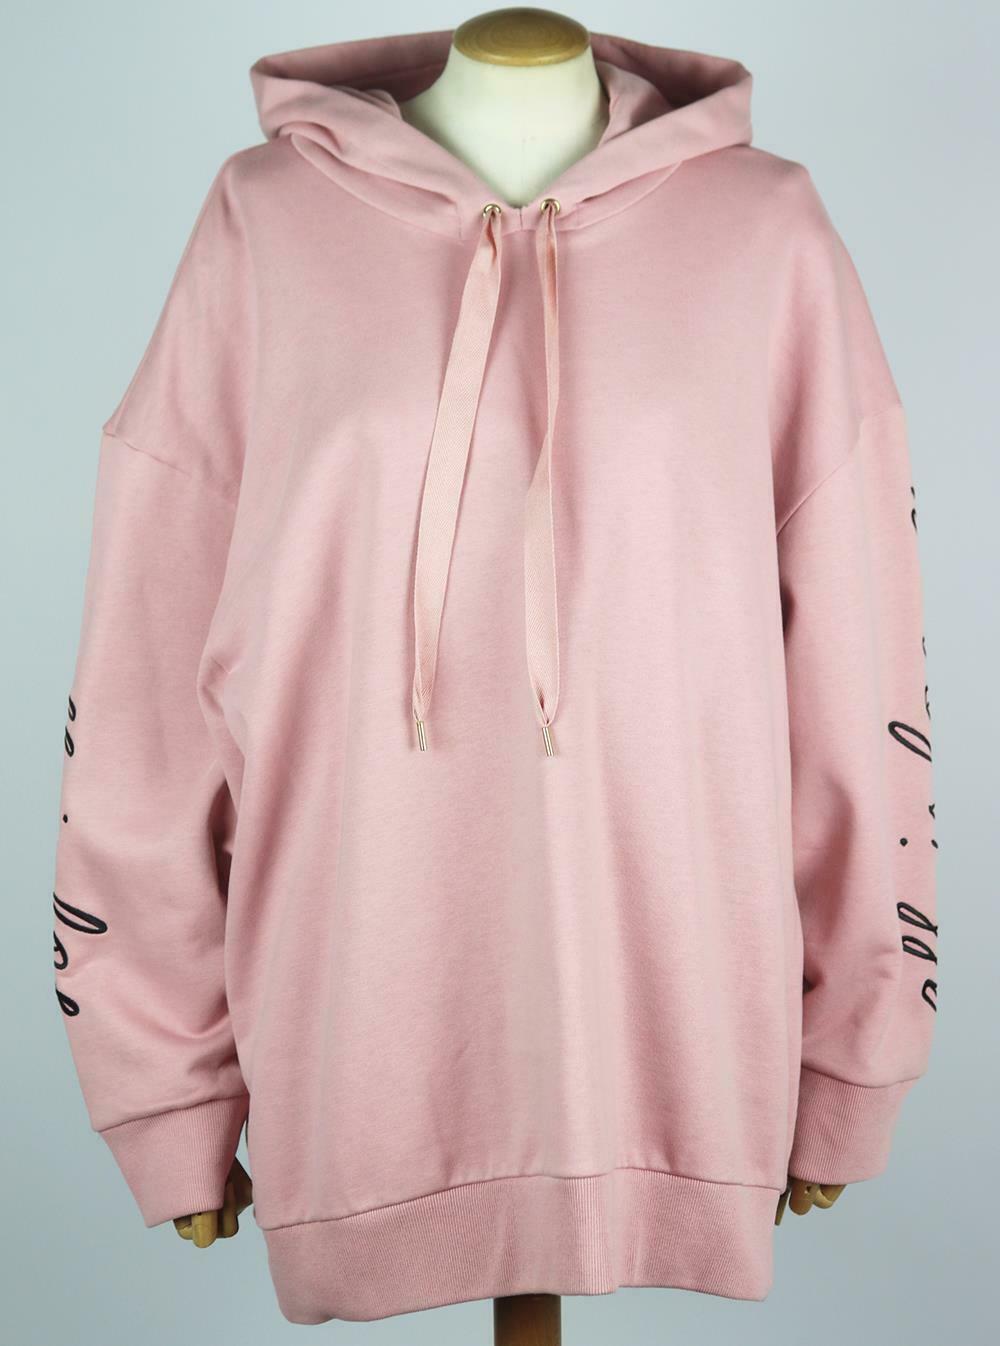 Stella McCartney's hoodie is cut from French cotton-terry that's embroidered with 'All Is Love' in black threads along the back and down the arms, it's designed in a slightly loose silhouette and works equally well with a skirt or track pants.
Pink